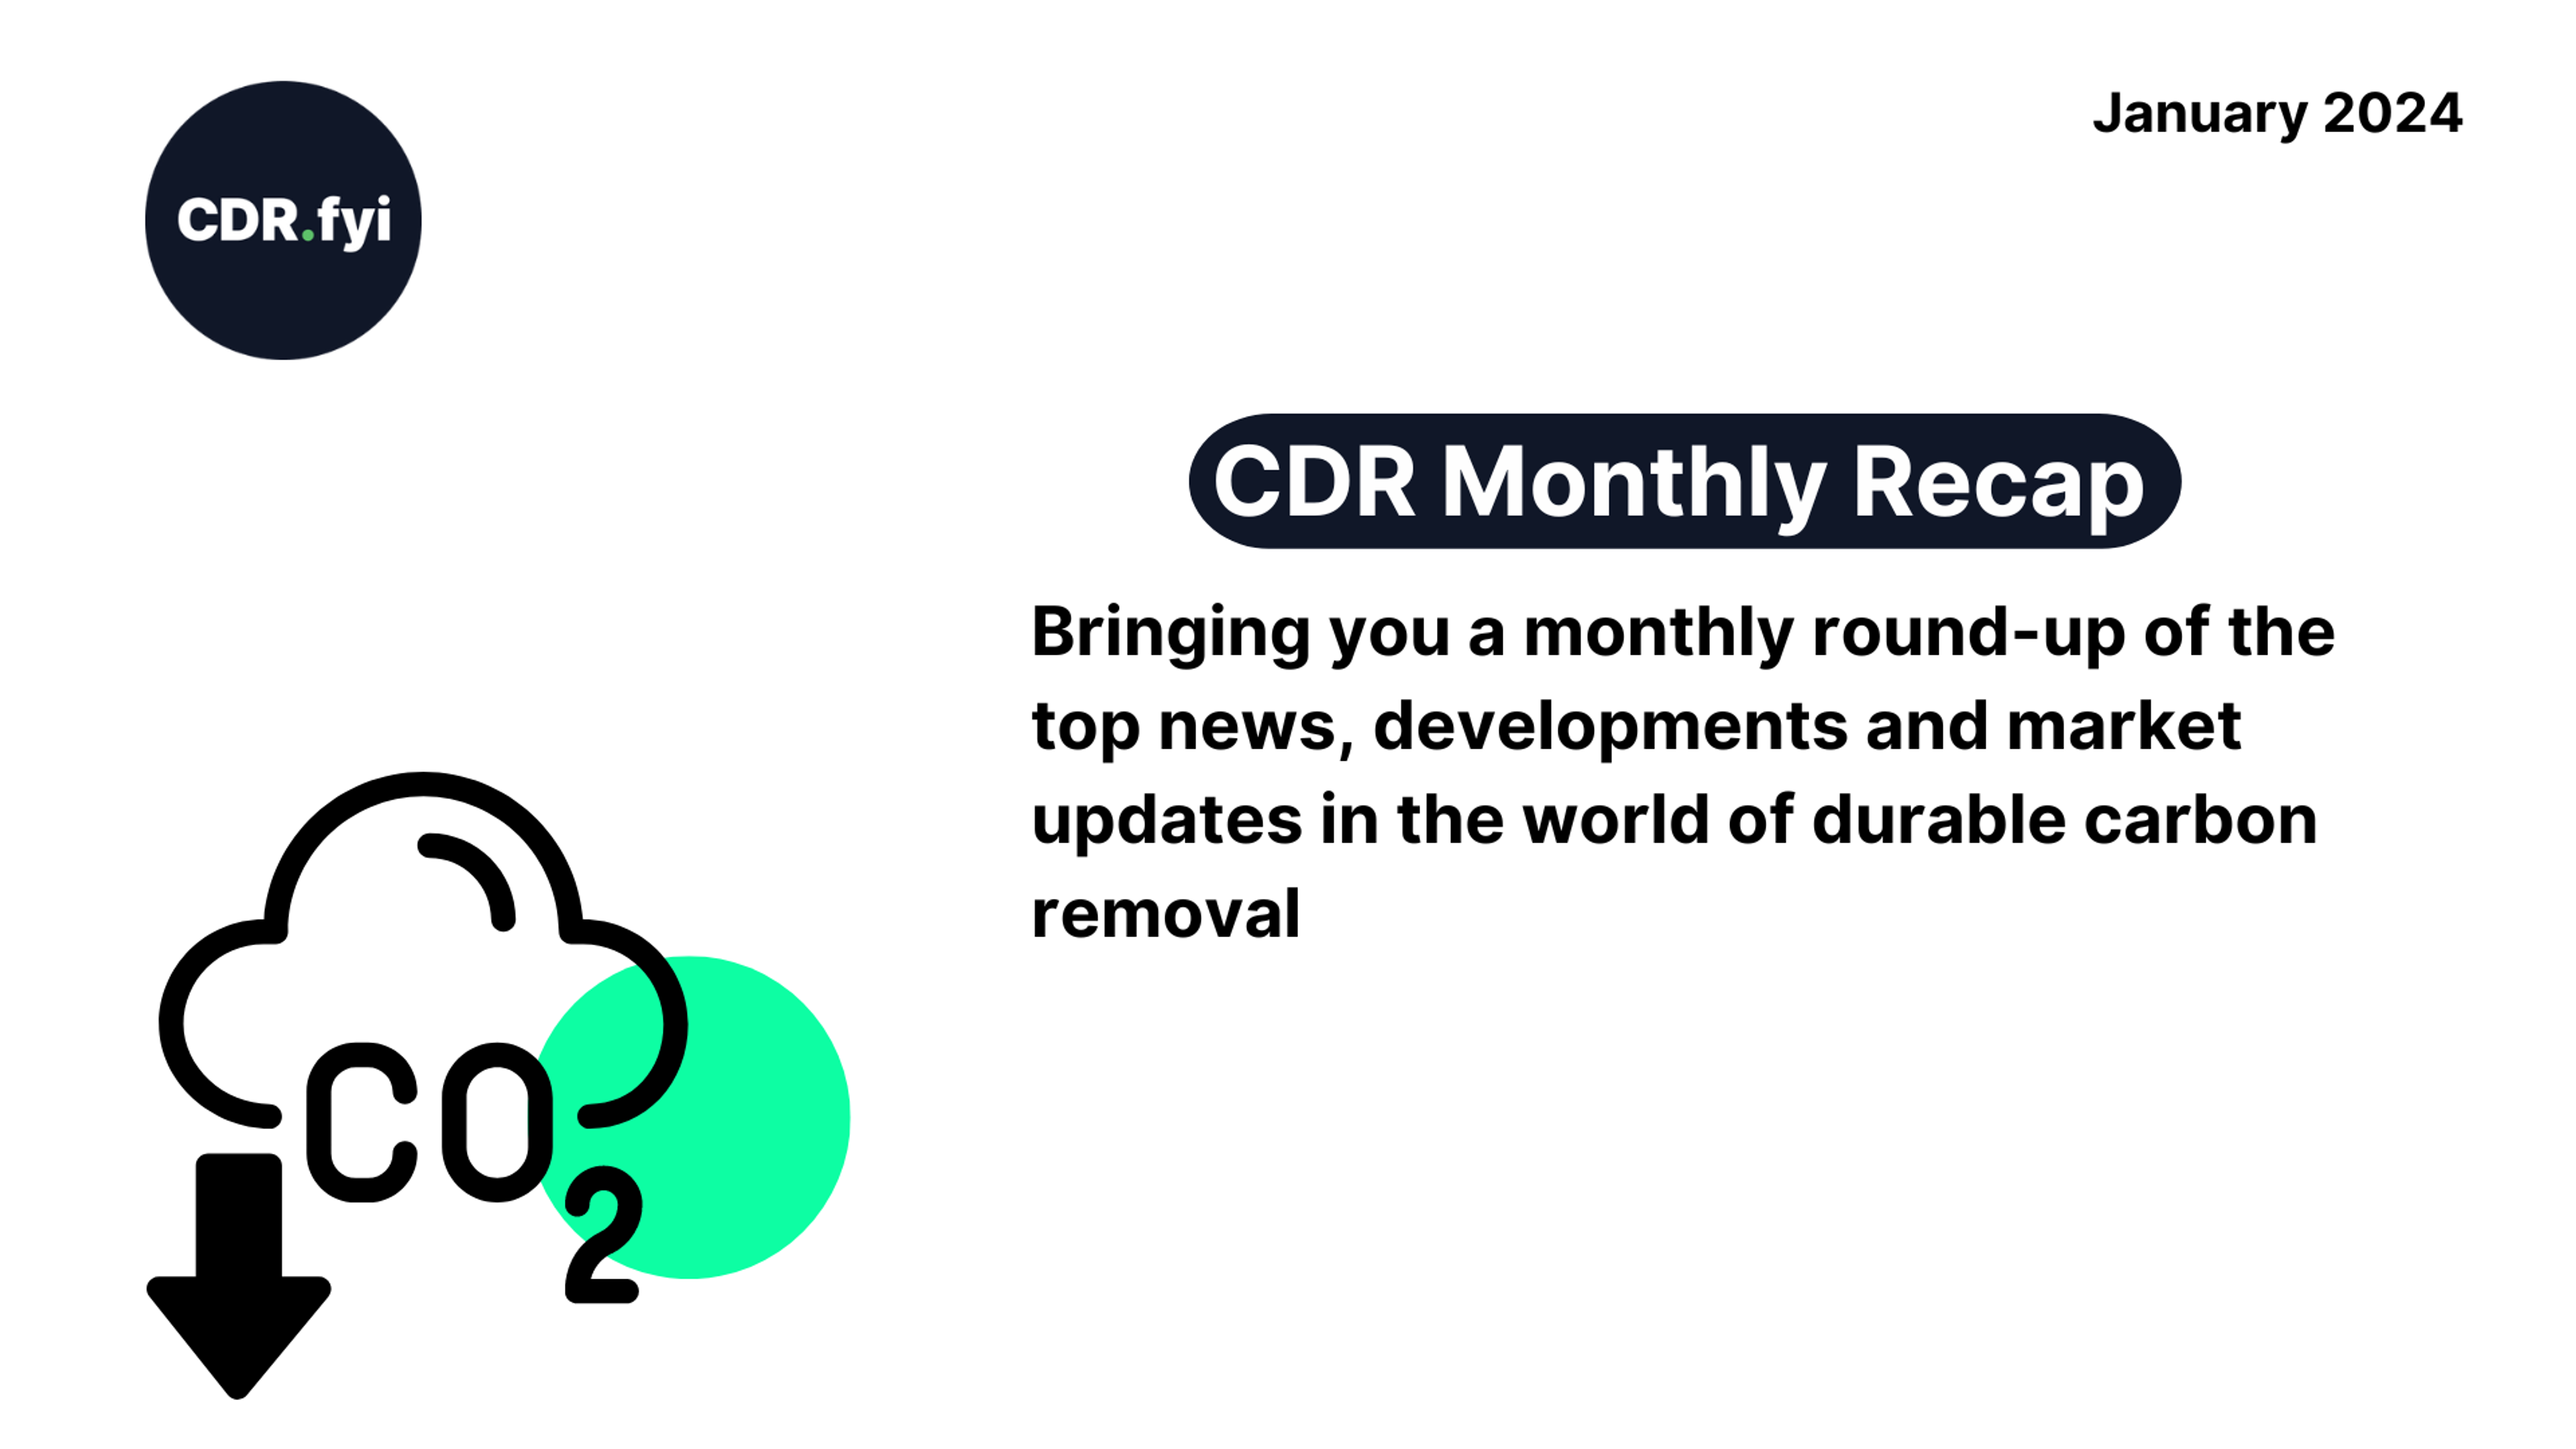 CDR Monthly Recap - January 2024 blog post image